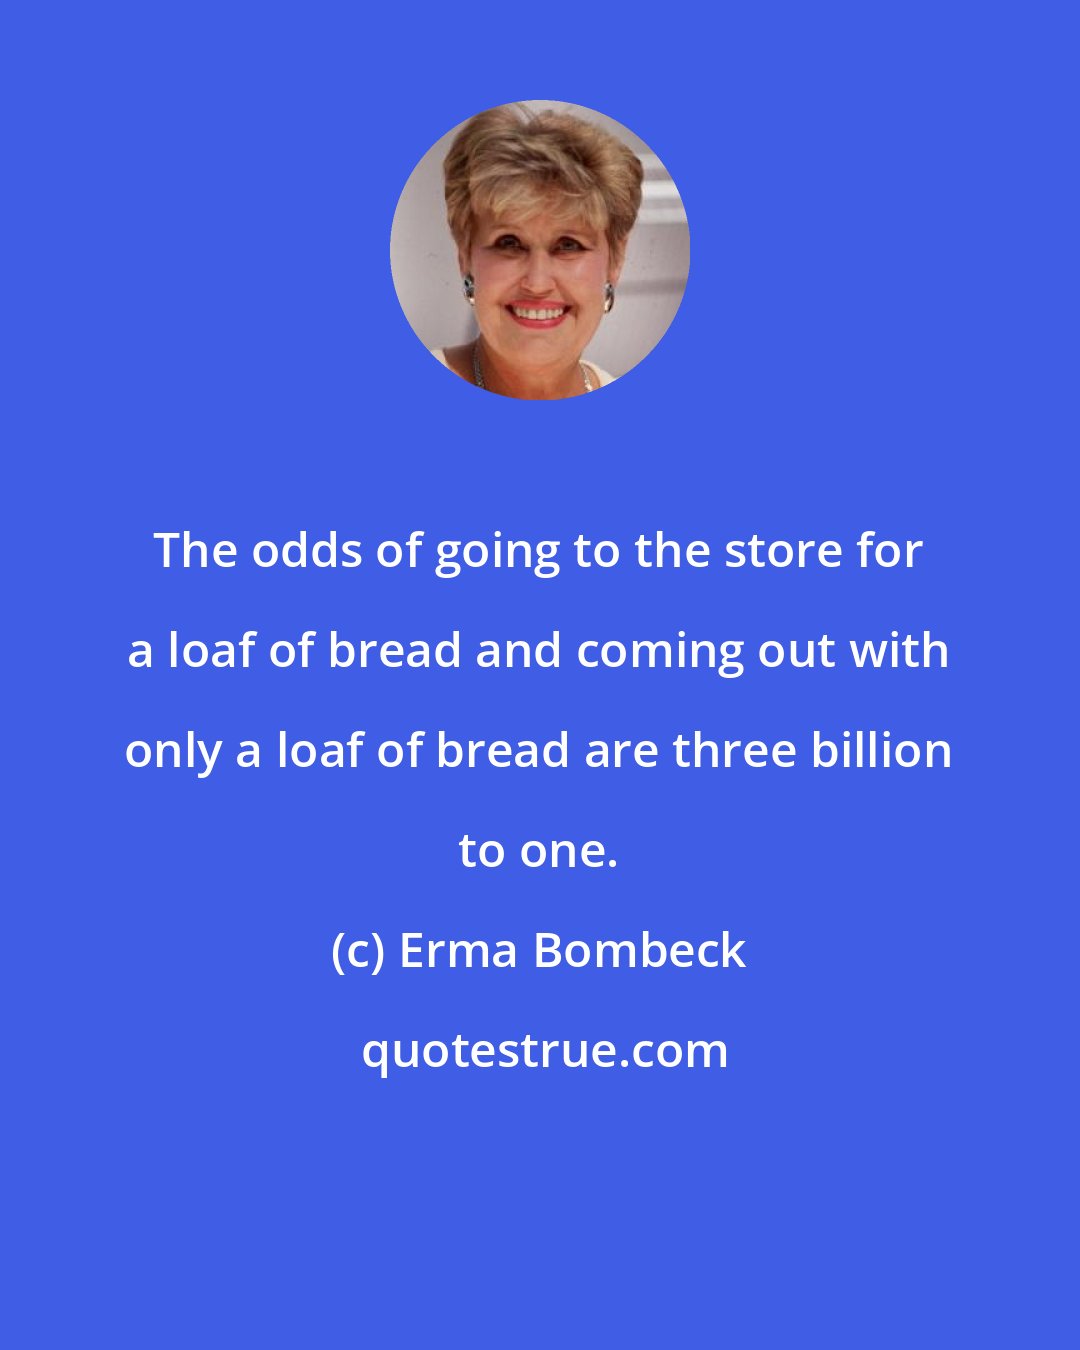 Erma Bombeck: The odds of going to the store for a loaf of bread and coming out with only a loaf of bread are three billion to one.